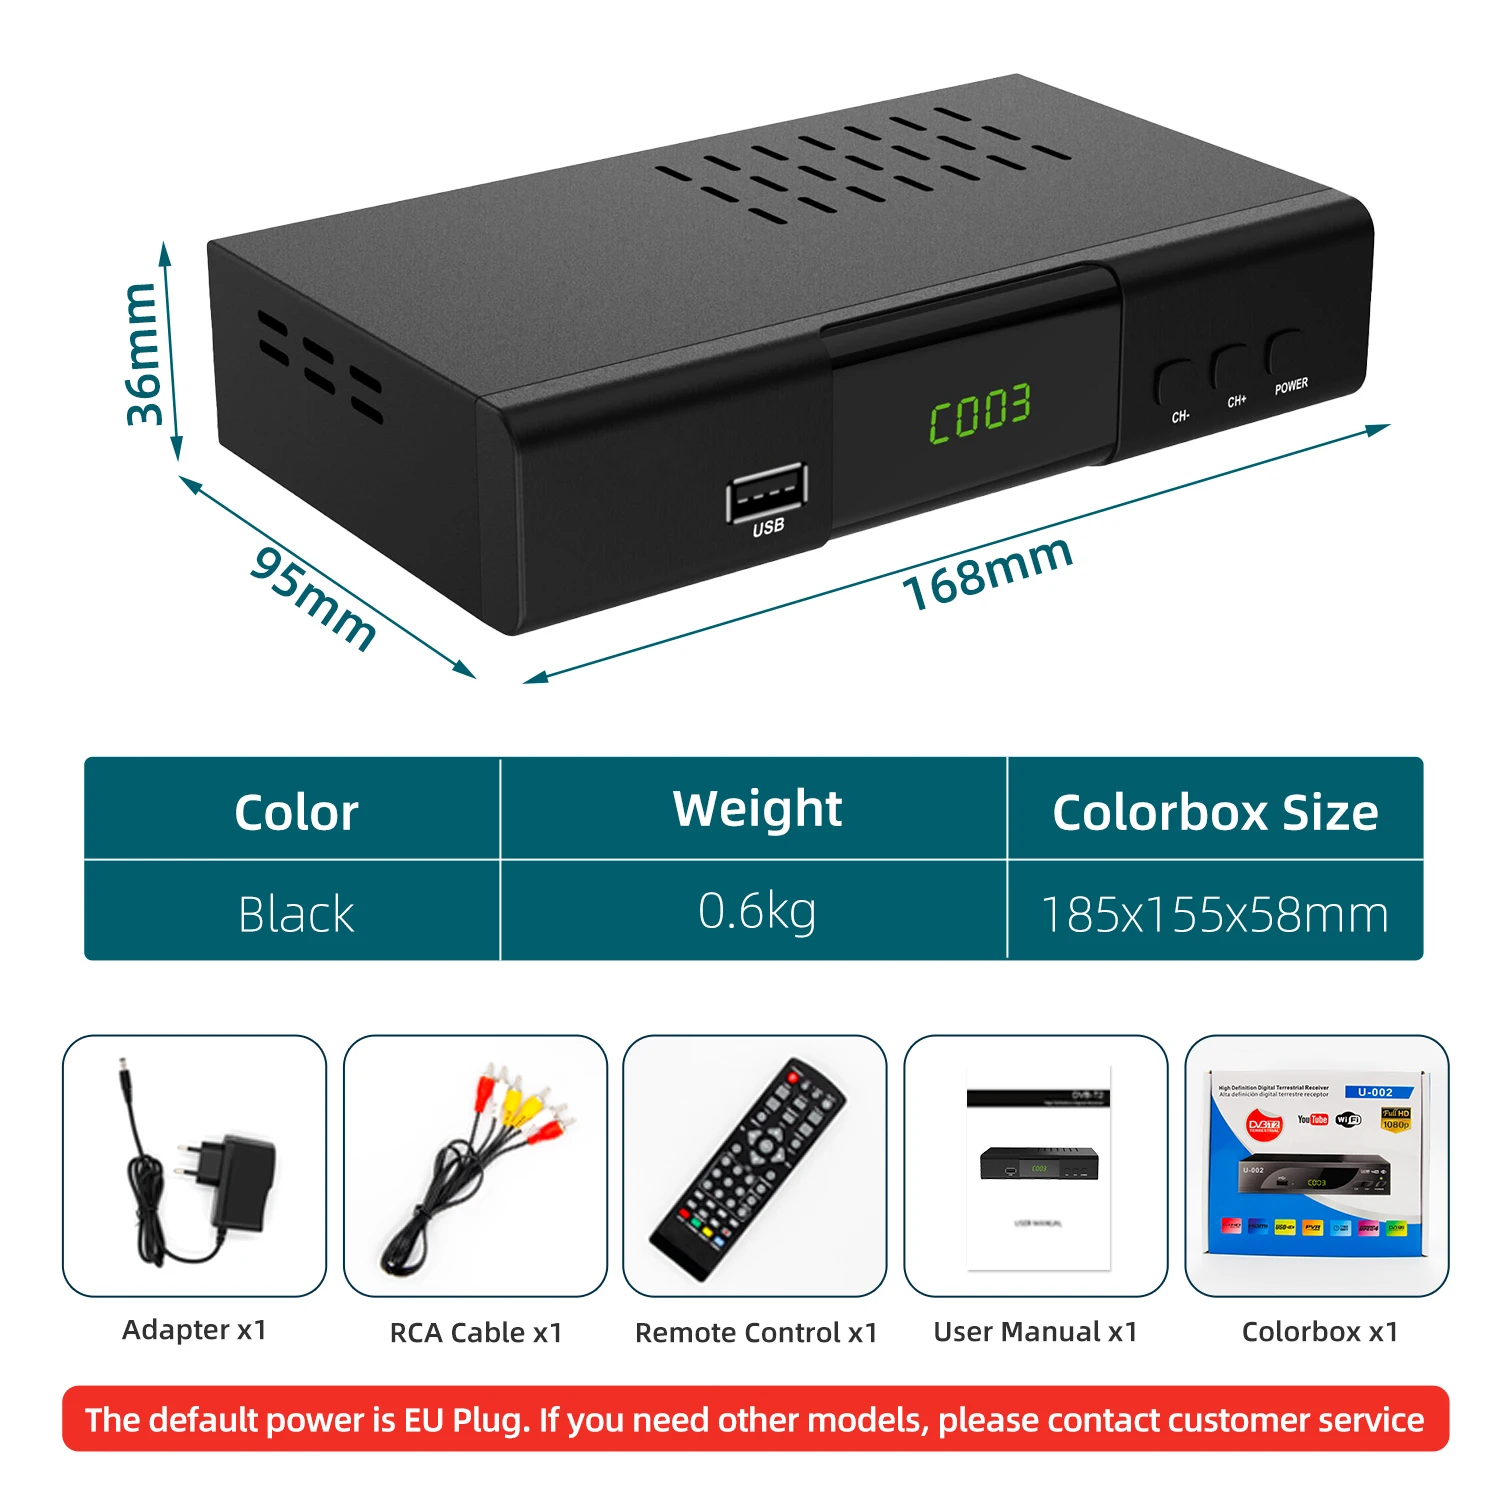 Junuo Tv Receiver Manufacturer Dvb T2 Set Top Box That Can Auto And  Manually Scan all Available TV and Radio Channels